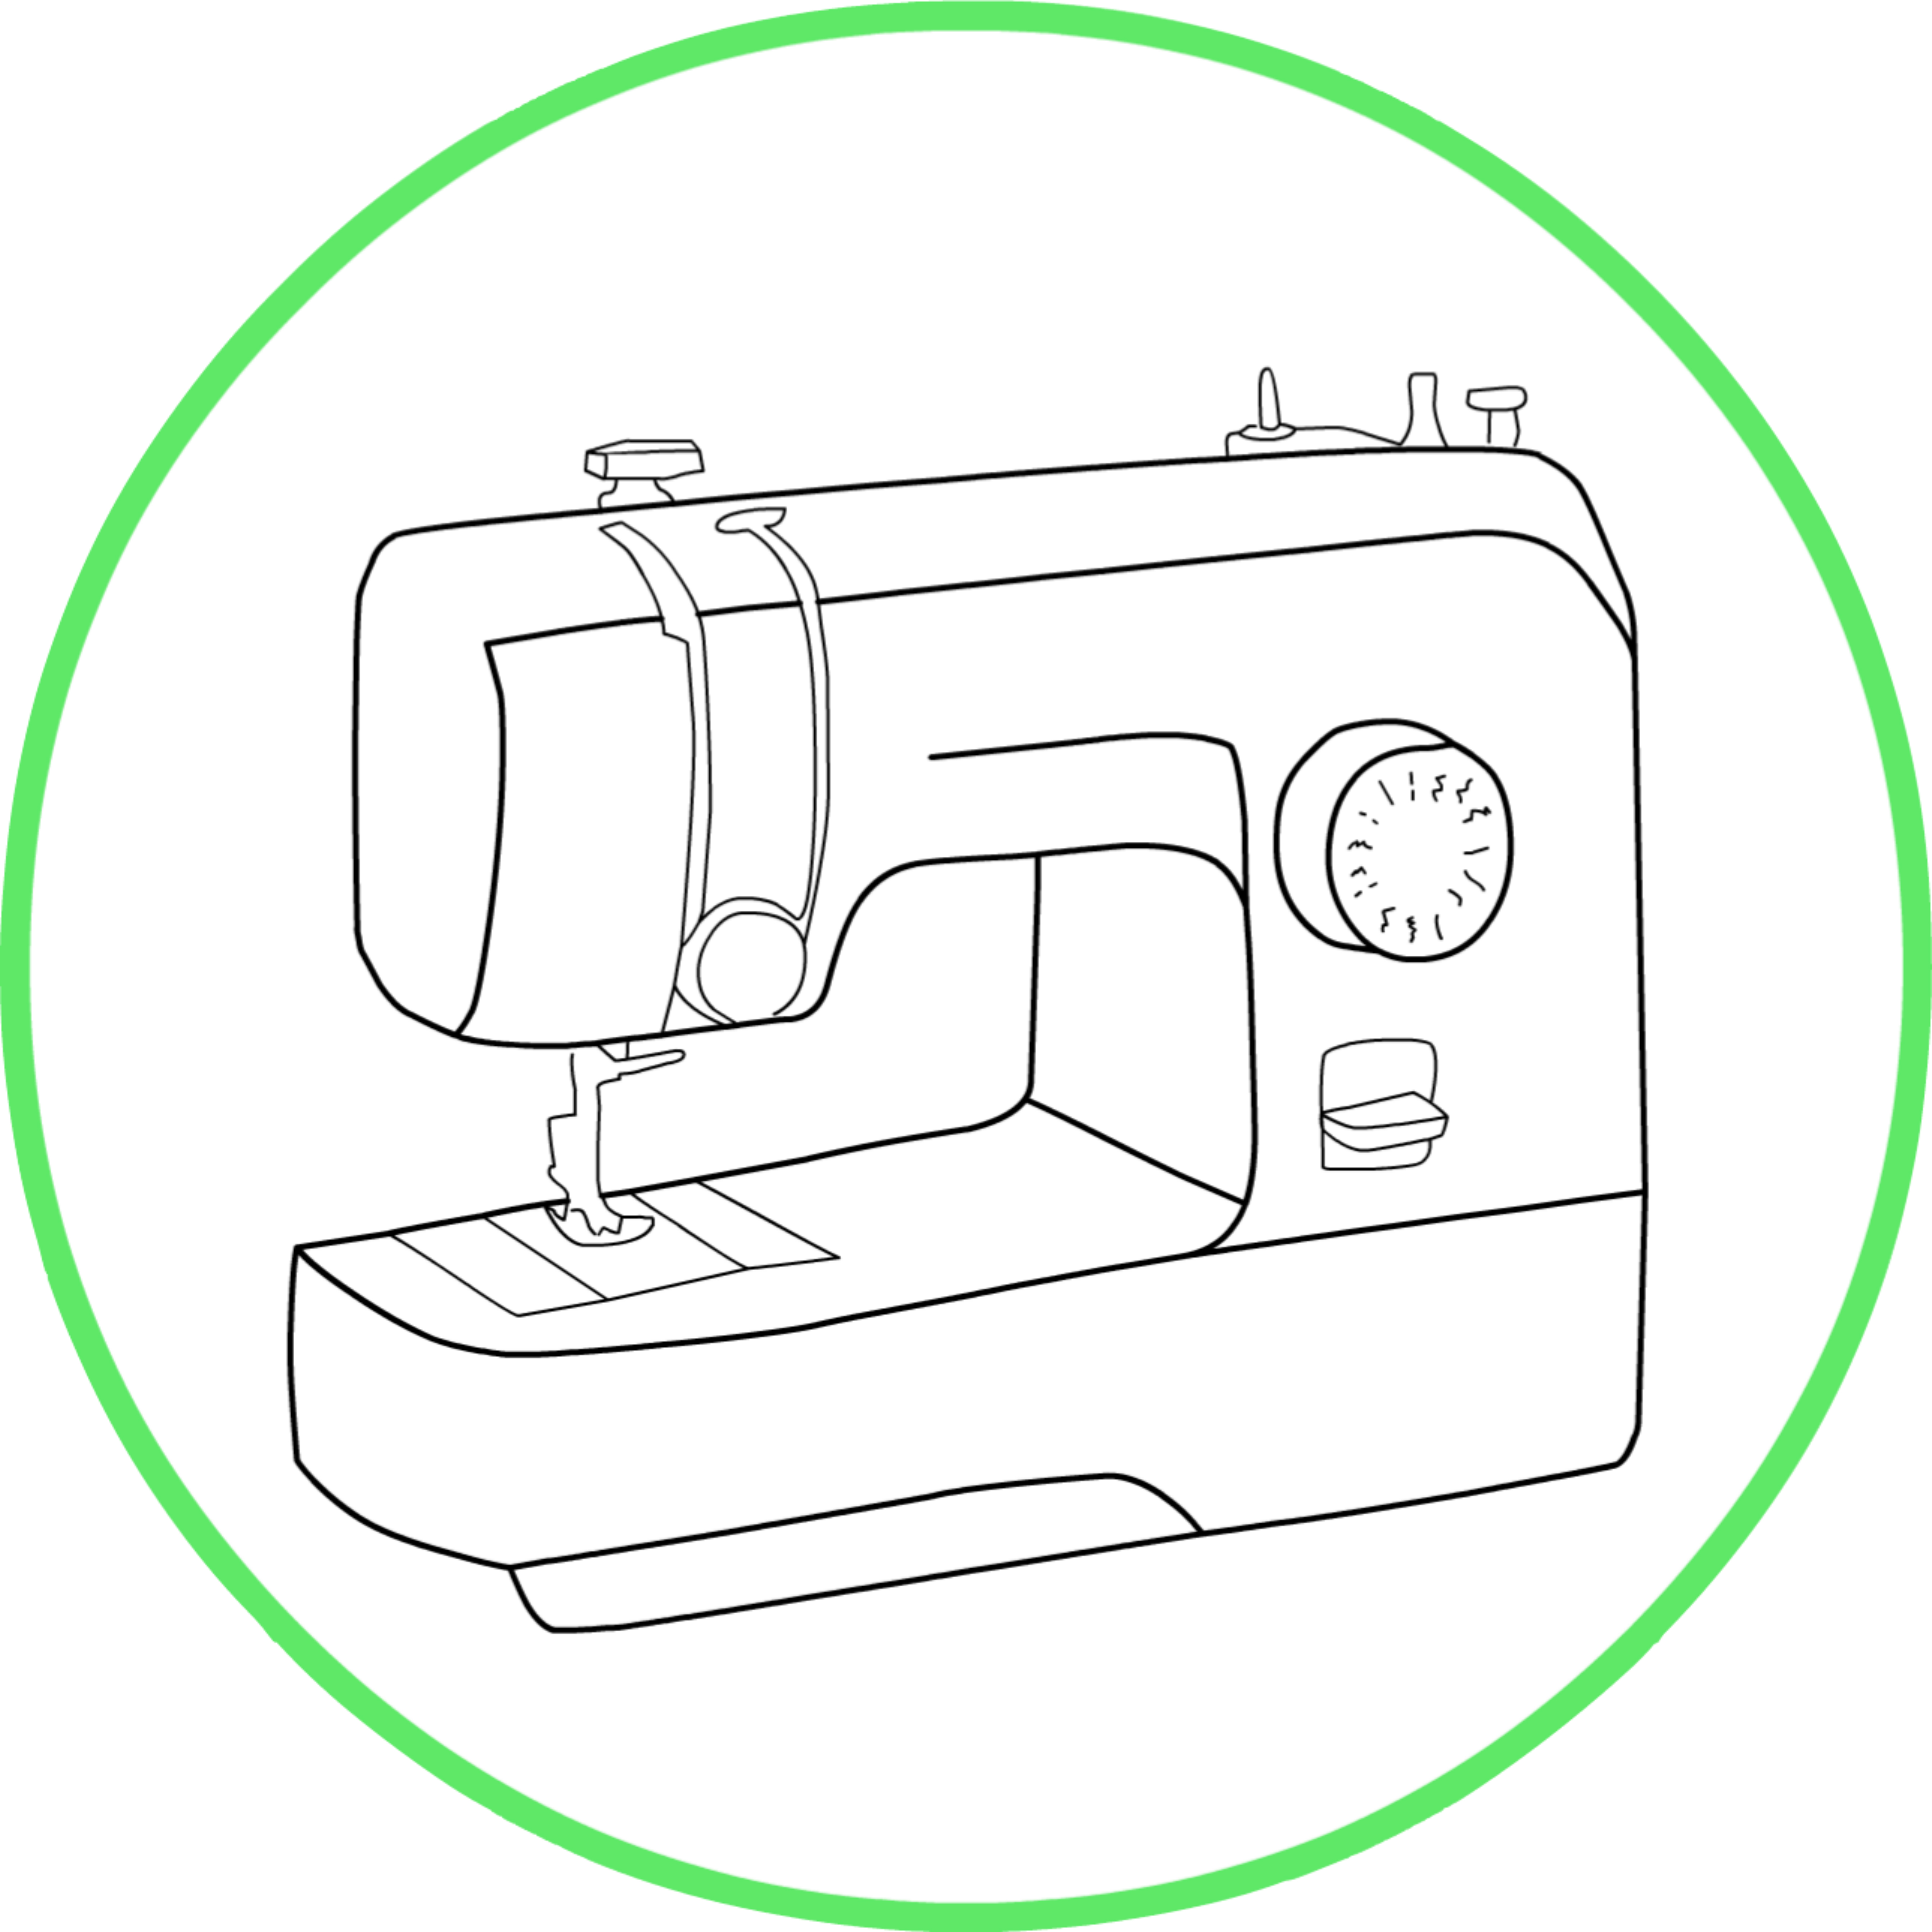 Image of a sewing machine